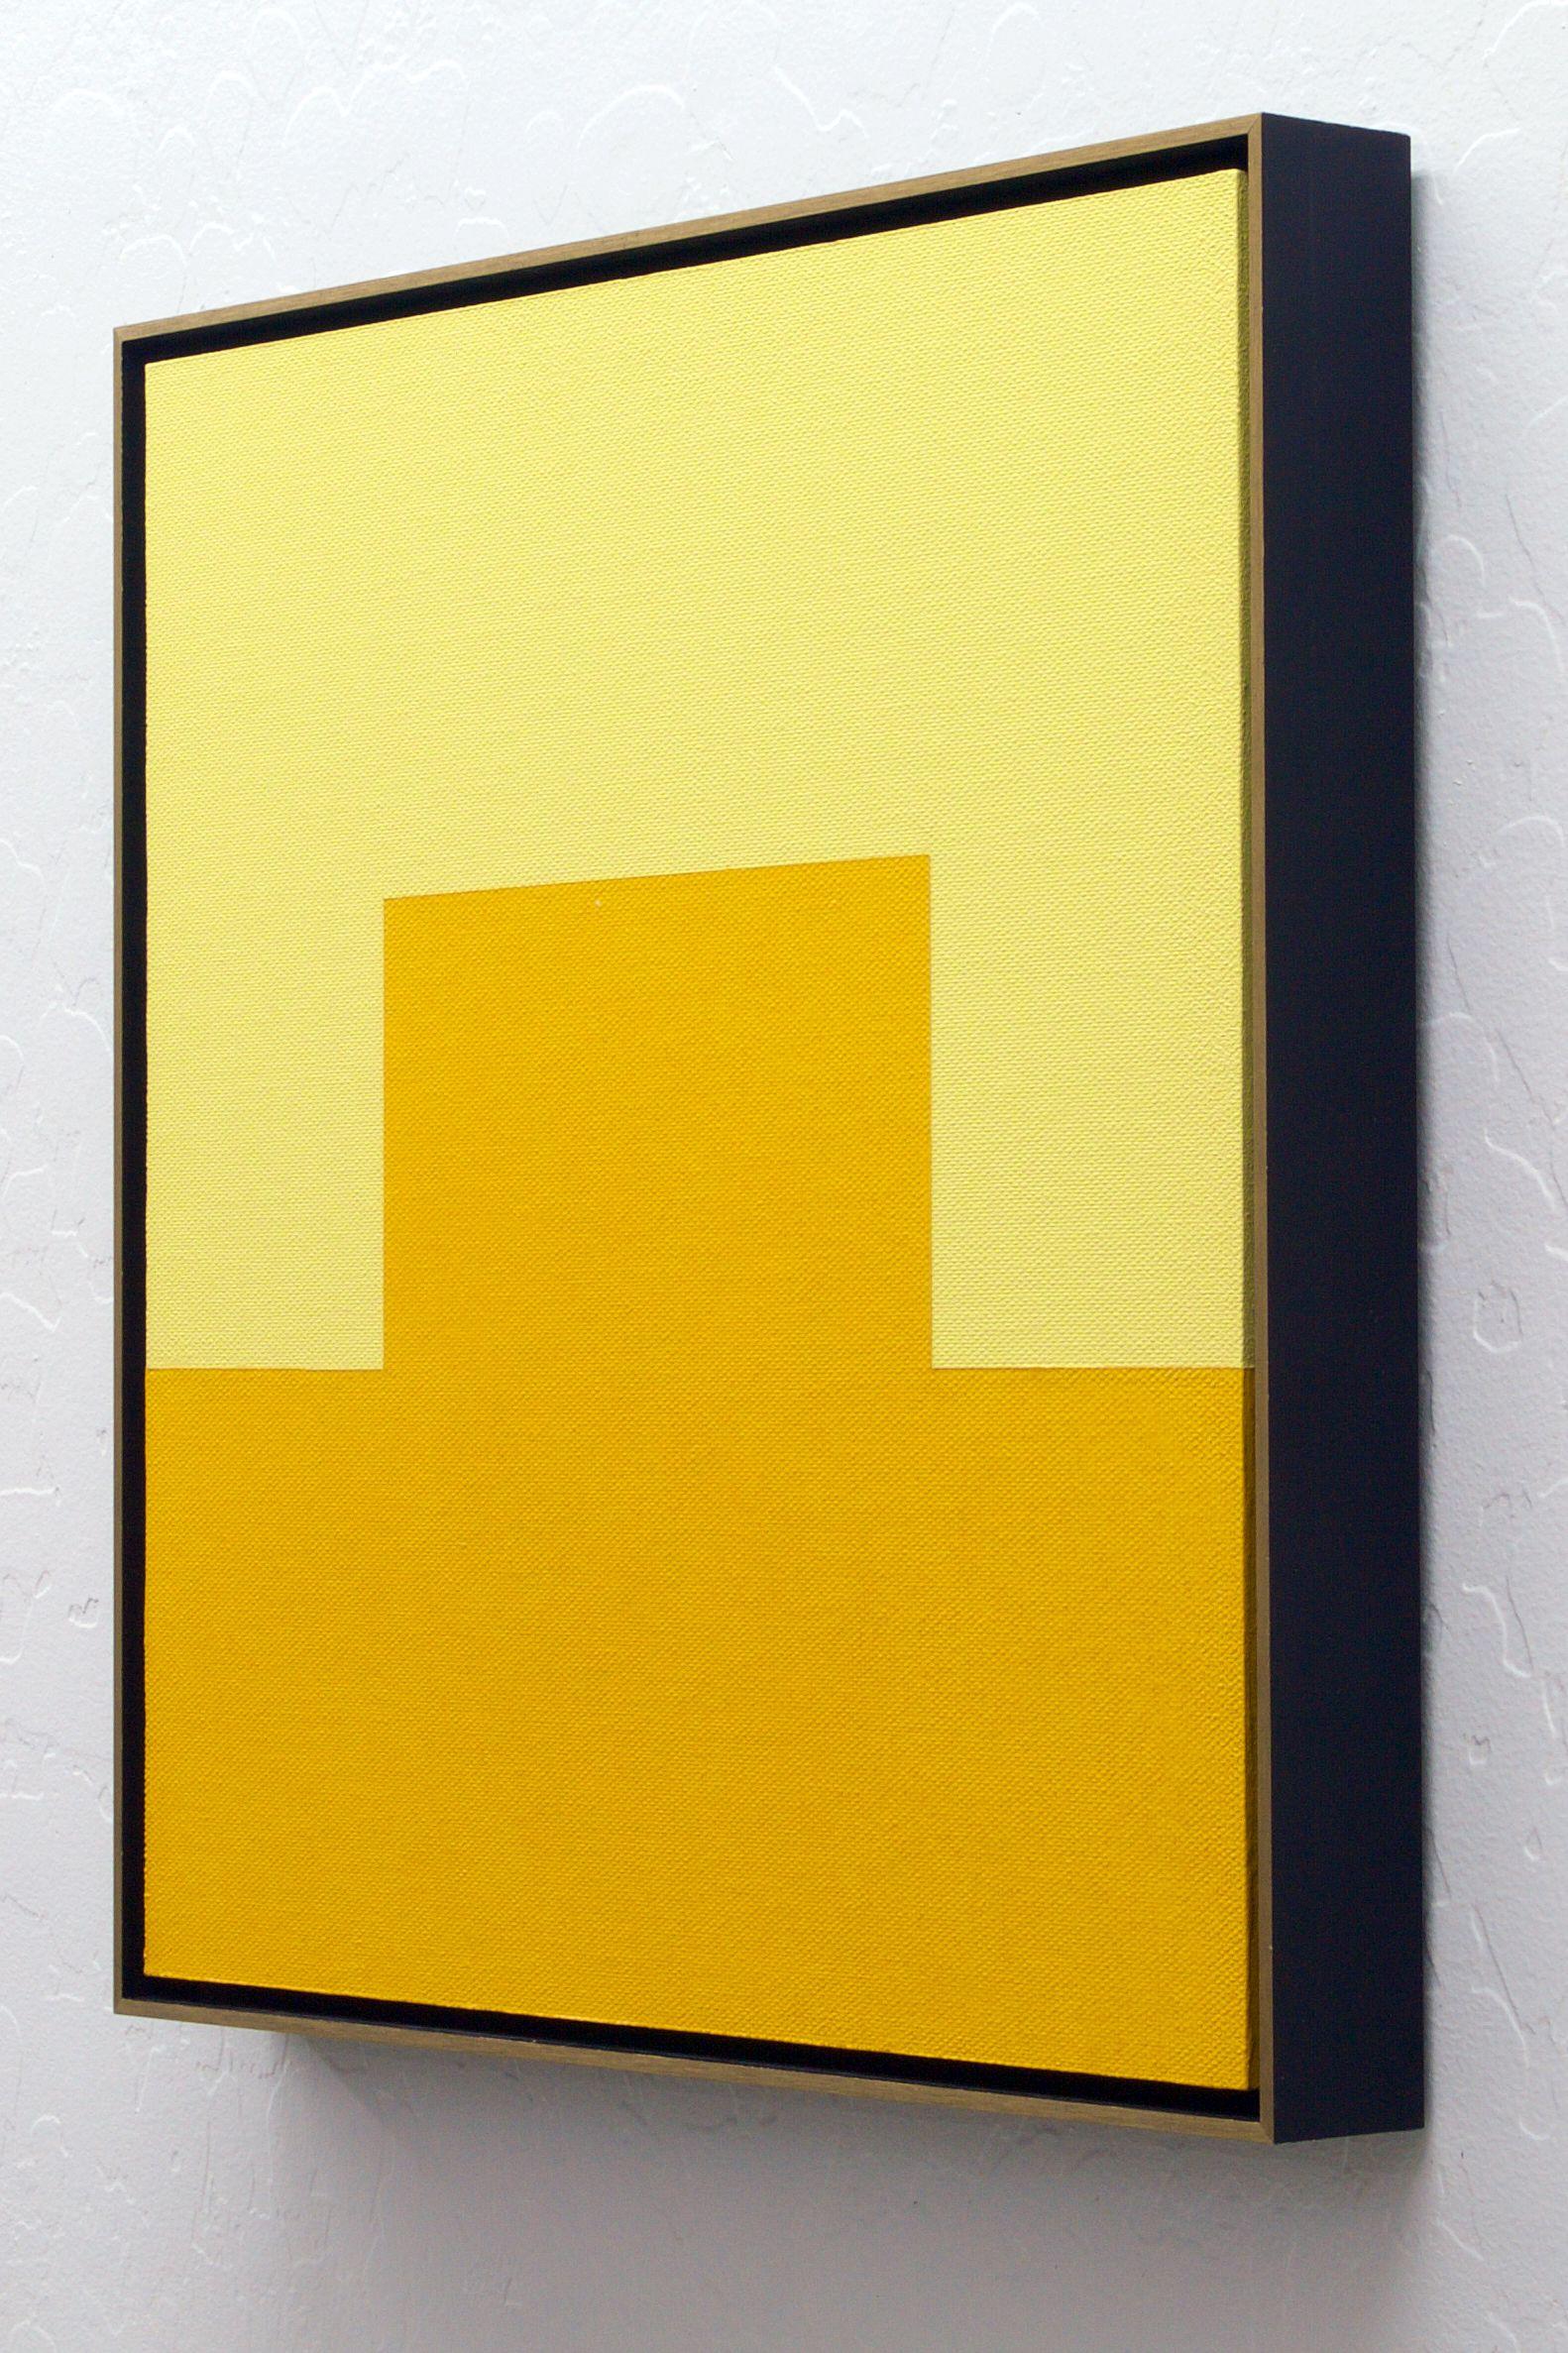 Original Modernist / MinimalistAcrylic Painting on Italian Polyester / Cotton Canvas over MDF Panel. The piece is Float Mounted in a thin Minimalist Satin Black & Gold Edge Metal Frame.    FRAMED SIZE: 12.75 X 12.75 X 1.5 Inches Deep    IMAGE SIZE: